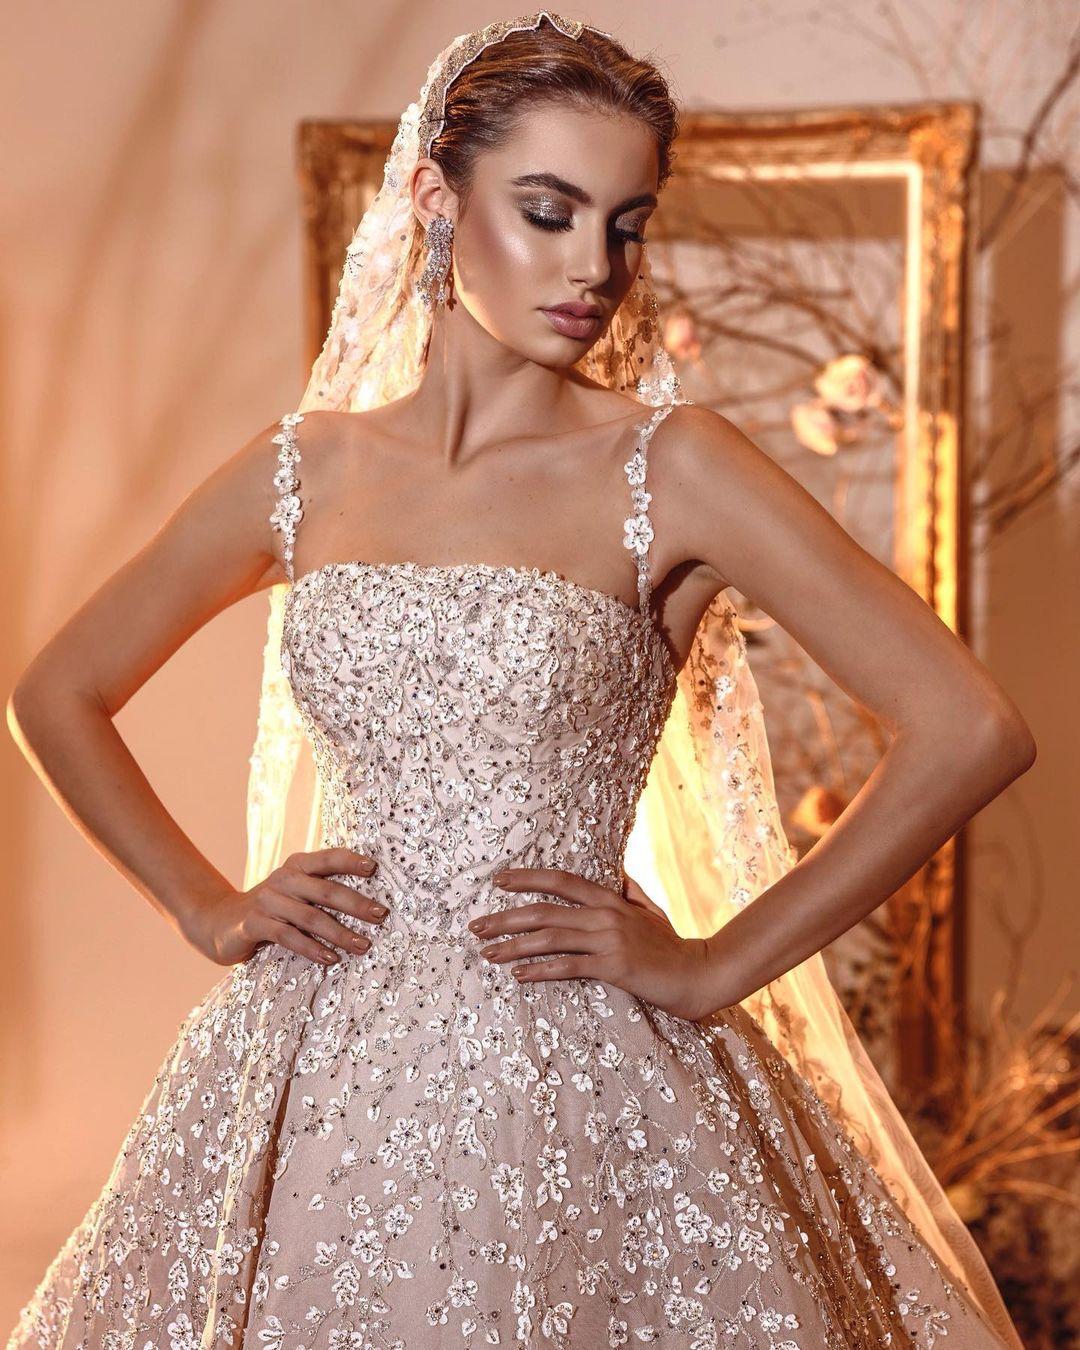 Reem Kachmar Bridal collection 2022 
Fabulously combine ultra feminine structured corset bodice with shimmering beaded patterns and exquisite feather and floral applique for a Glamours Modern and Timeless Bride . 

#kachmarreem #reemkachmarcouture #reemkachmar #reemkachmar2022 #reemkachmarbridal22 #couture #fashion #brides #weddinggown #weddingdress #abudhabi #love #her #beirut #lebanon #riyadh #jeddah #dubai #cairo #kuwait #doha #instafashion #instacouture #kachmarreem #instabride #ss22